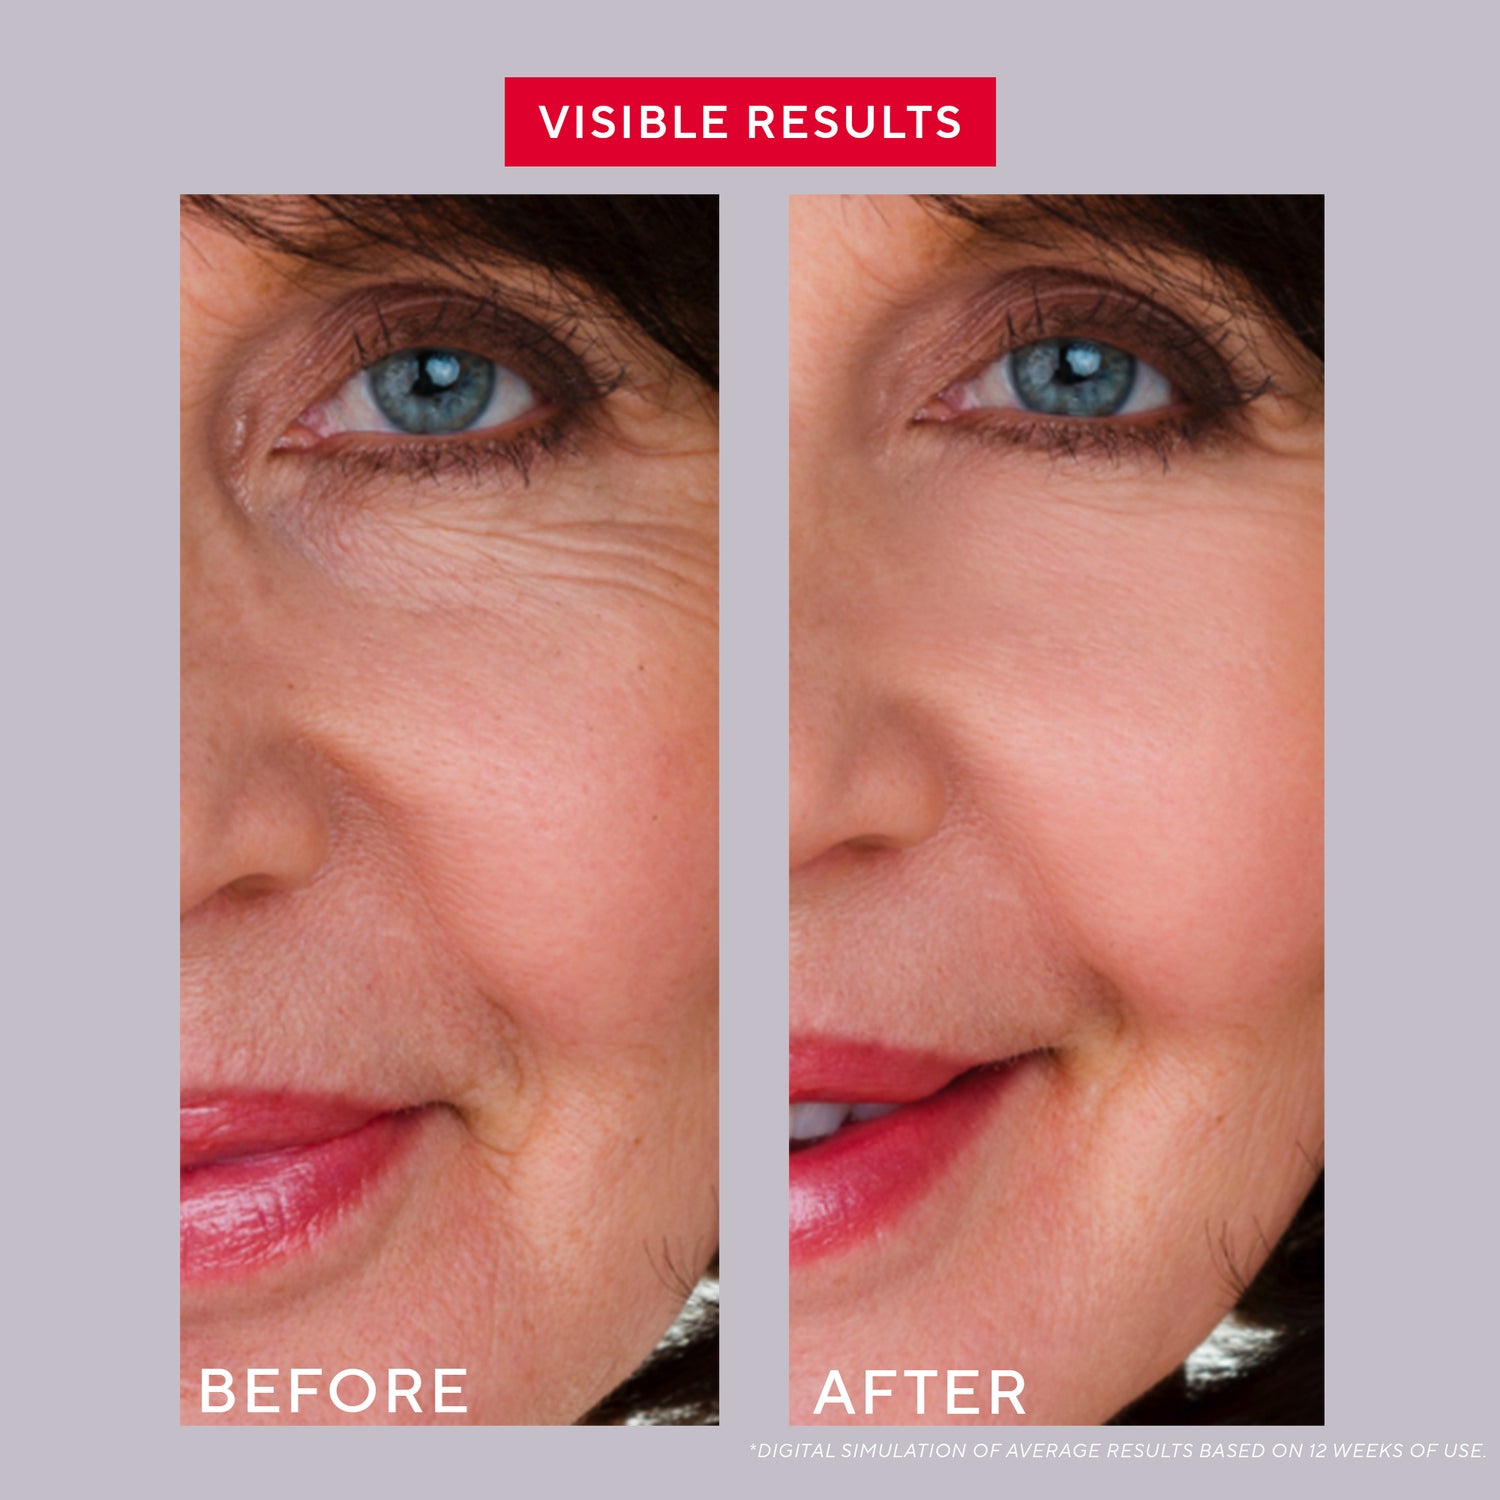 Mirabella Beauty Replenish & Restore Multi-Peptide Serum - Retinol and Vitamin C Serum for Face Before and After Visible Results